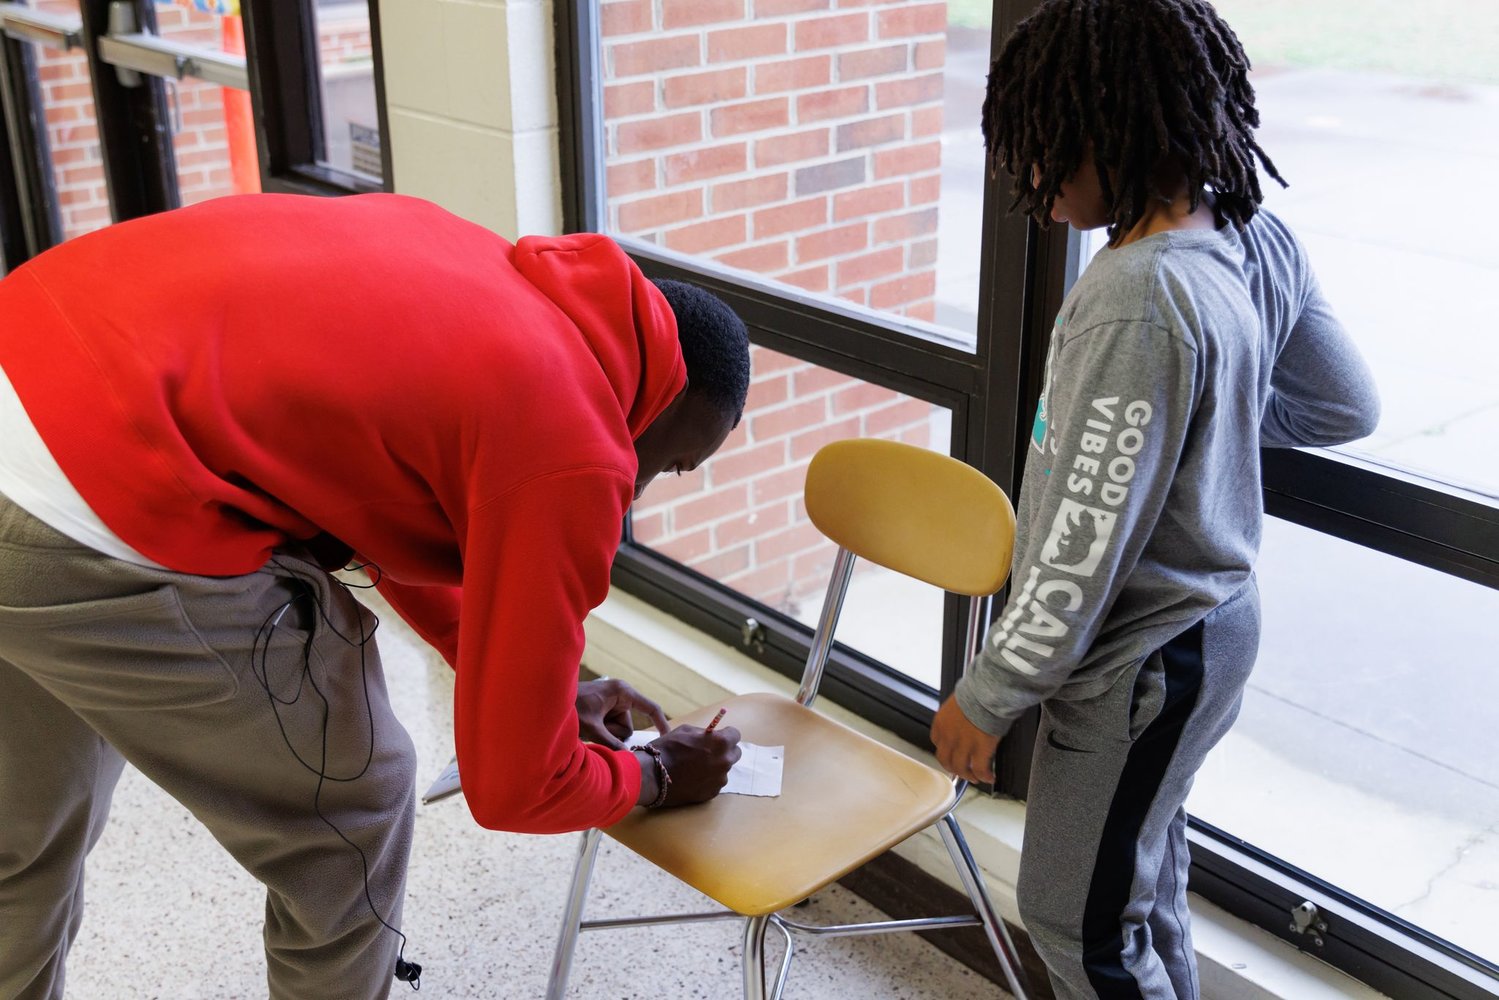 Kansas City Chiefs star and Fayetteville native Joshua Williams signs an autograph for a student at Loyd Auman Elementary School on Thursday. Williams read aloud to the children and encouraged them to follow their dreams.